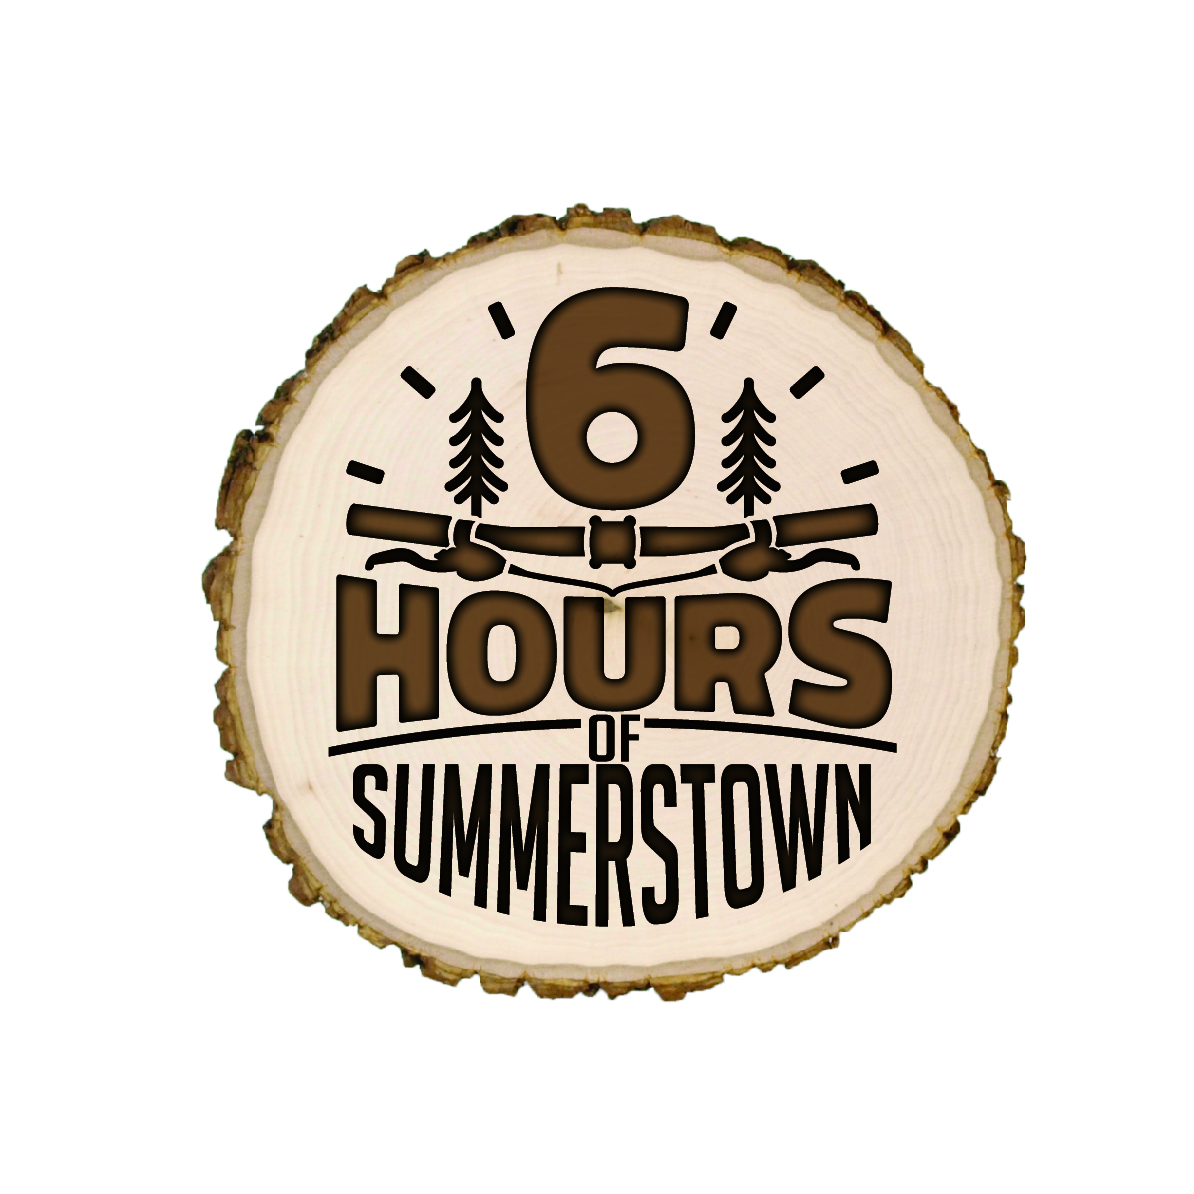 New event at Summerstown Trails: Six Hours of Summerstown